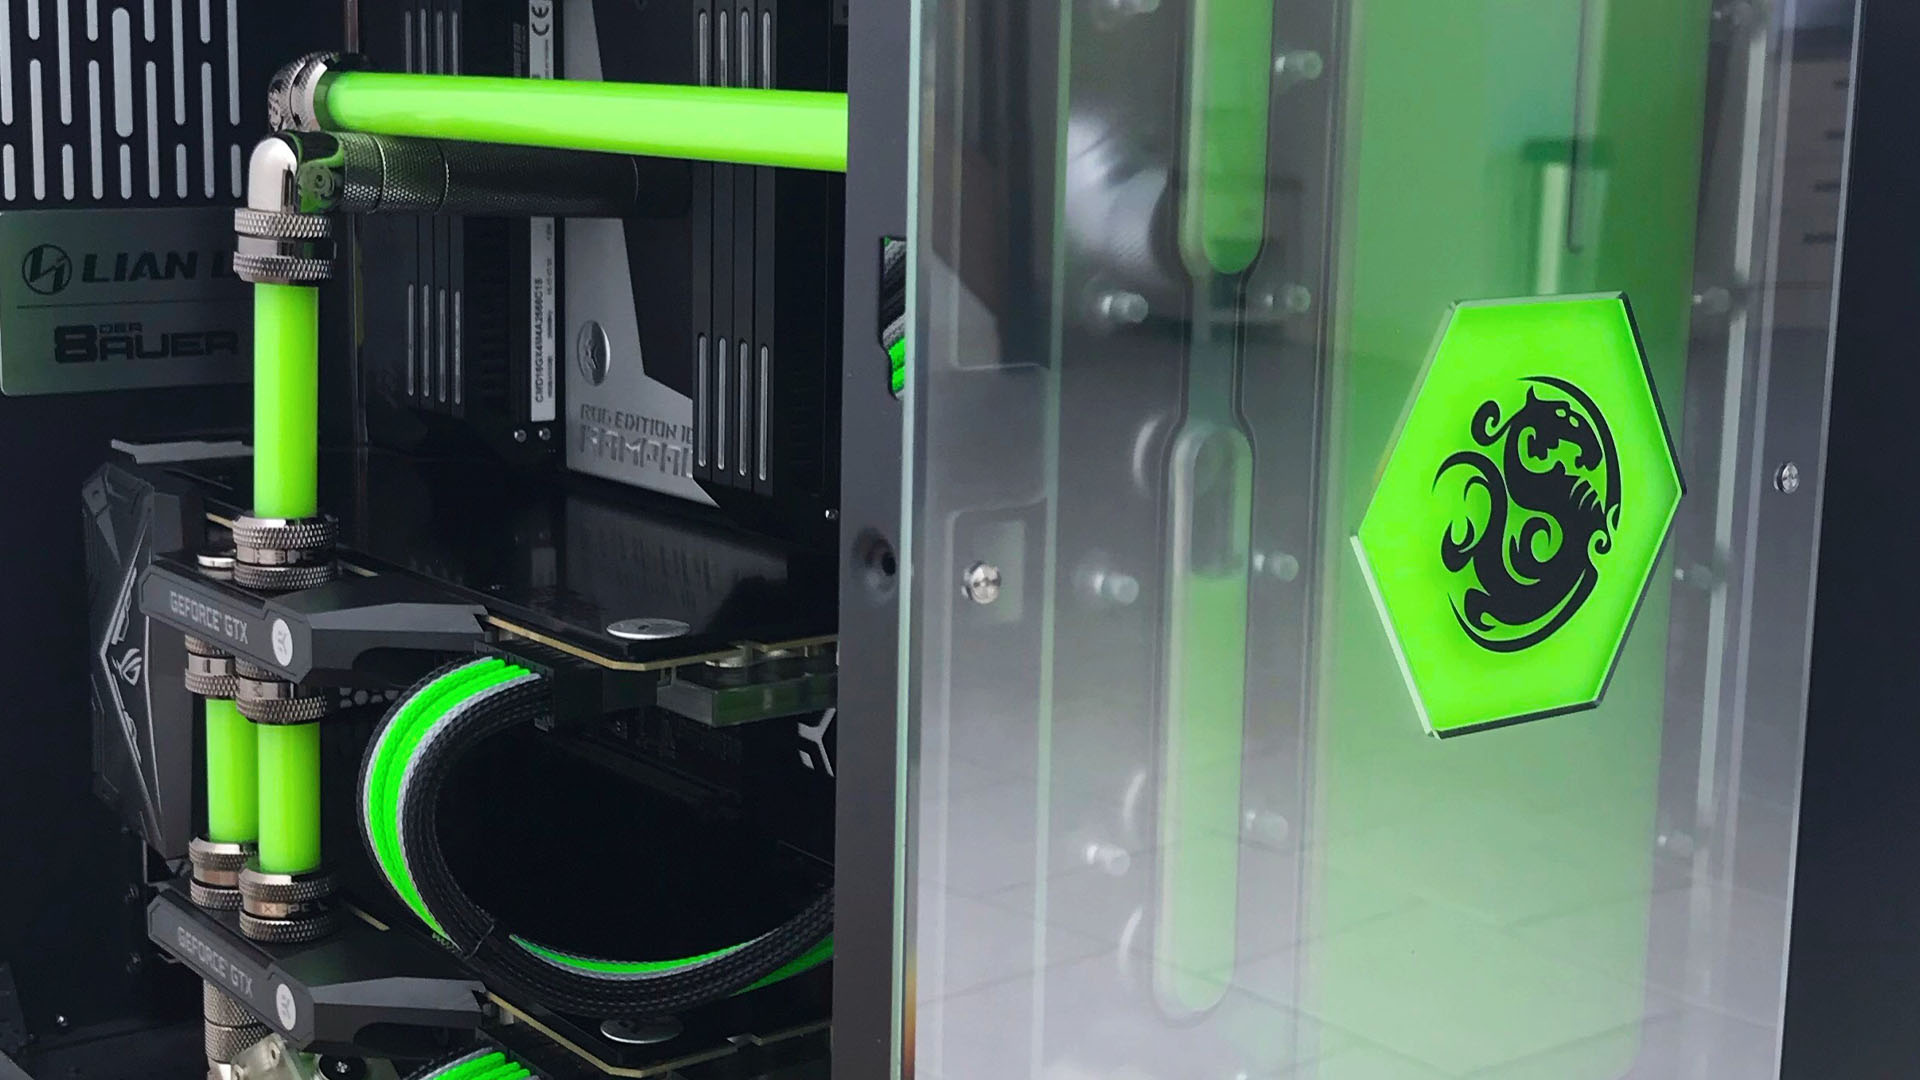 The bright green logo on the front of the acid rain gaming pc